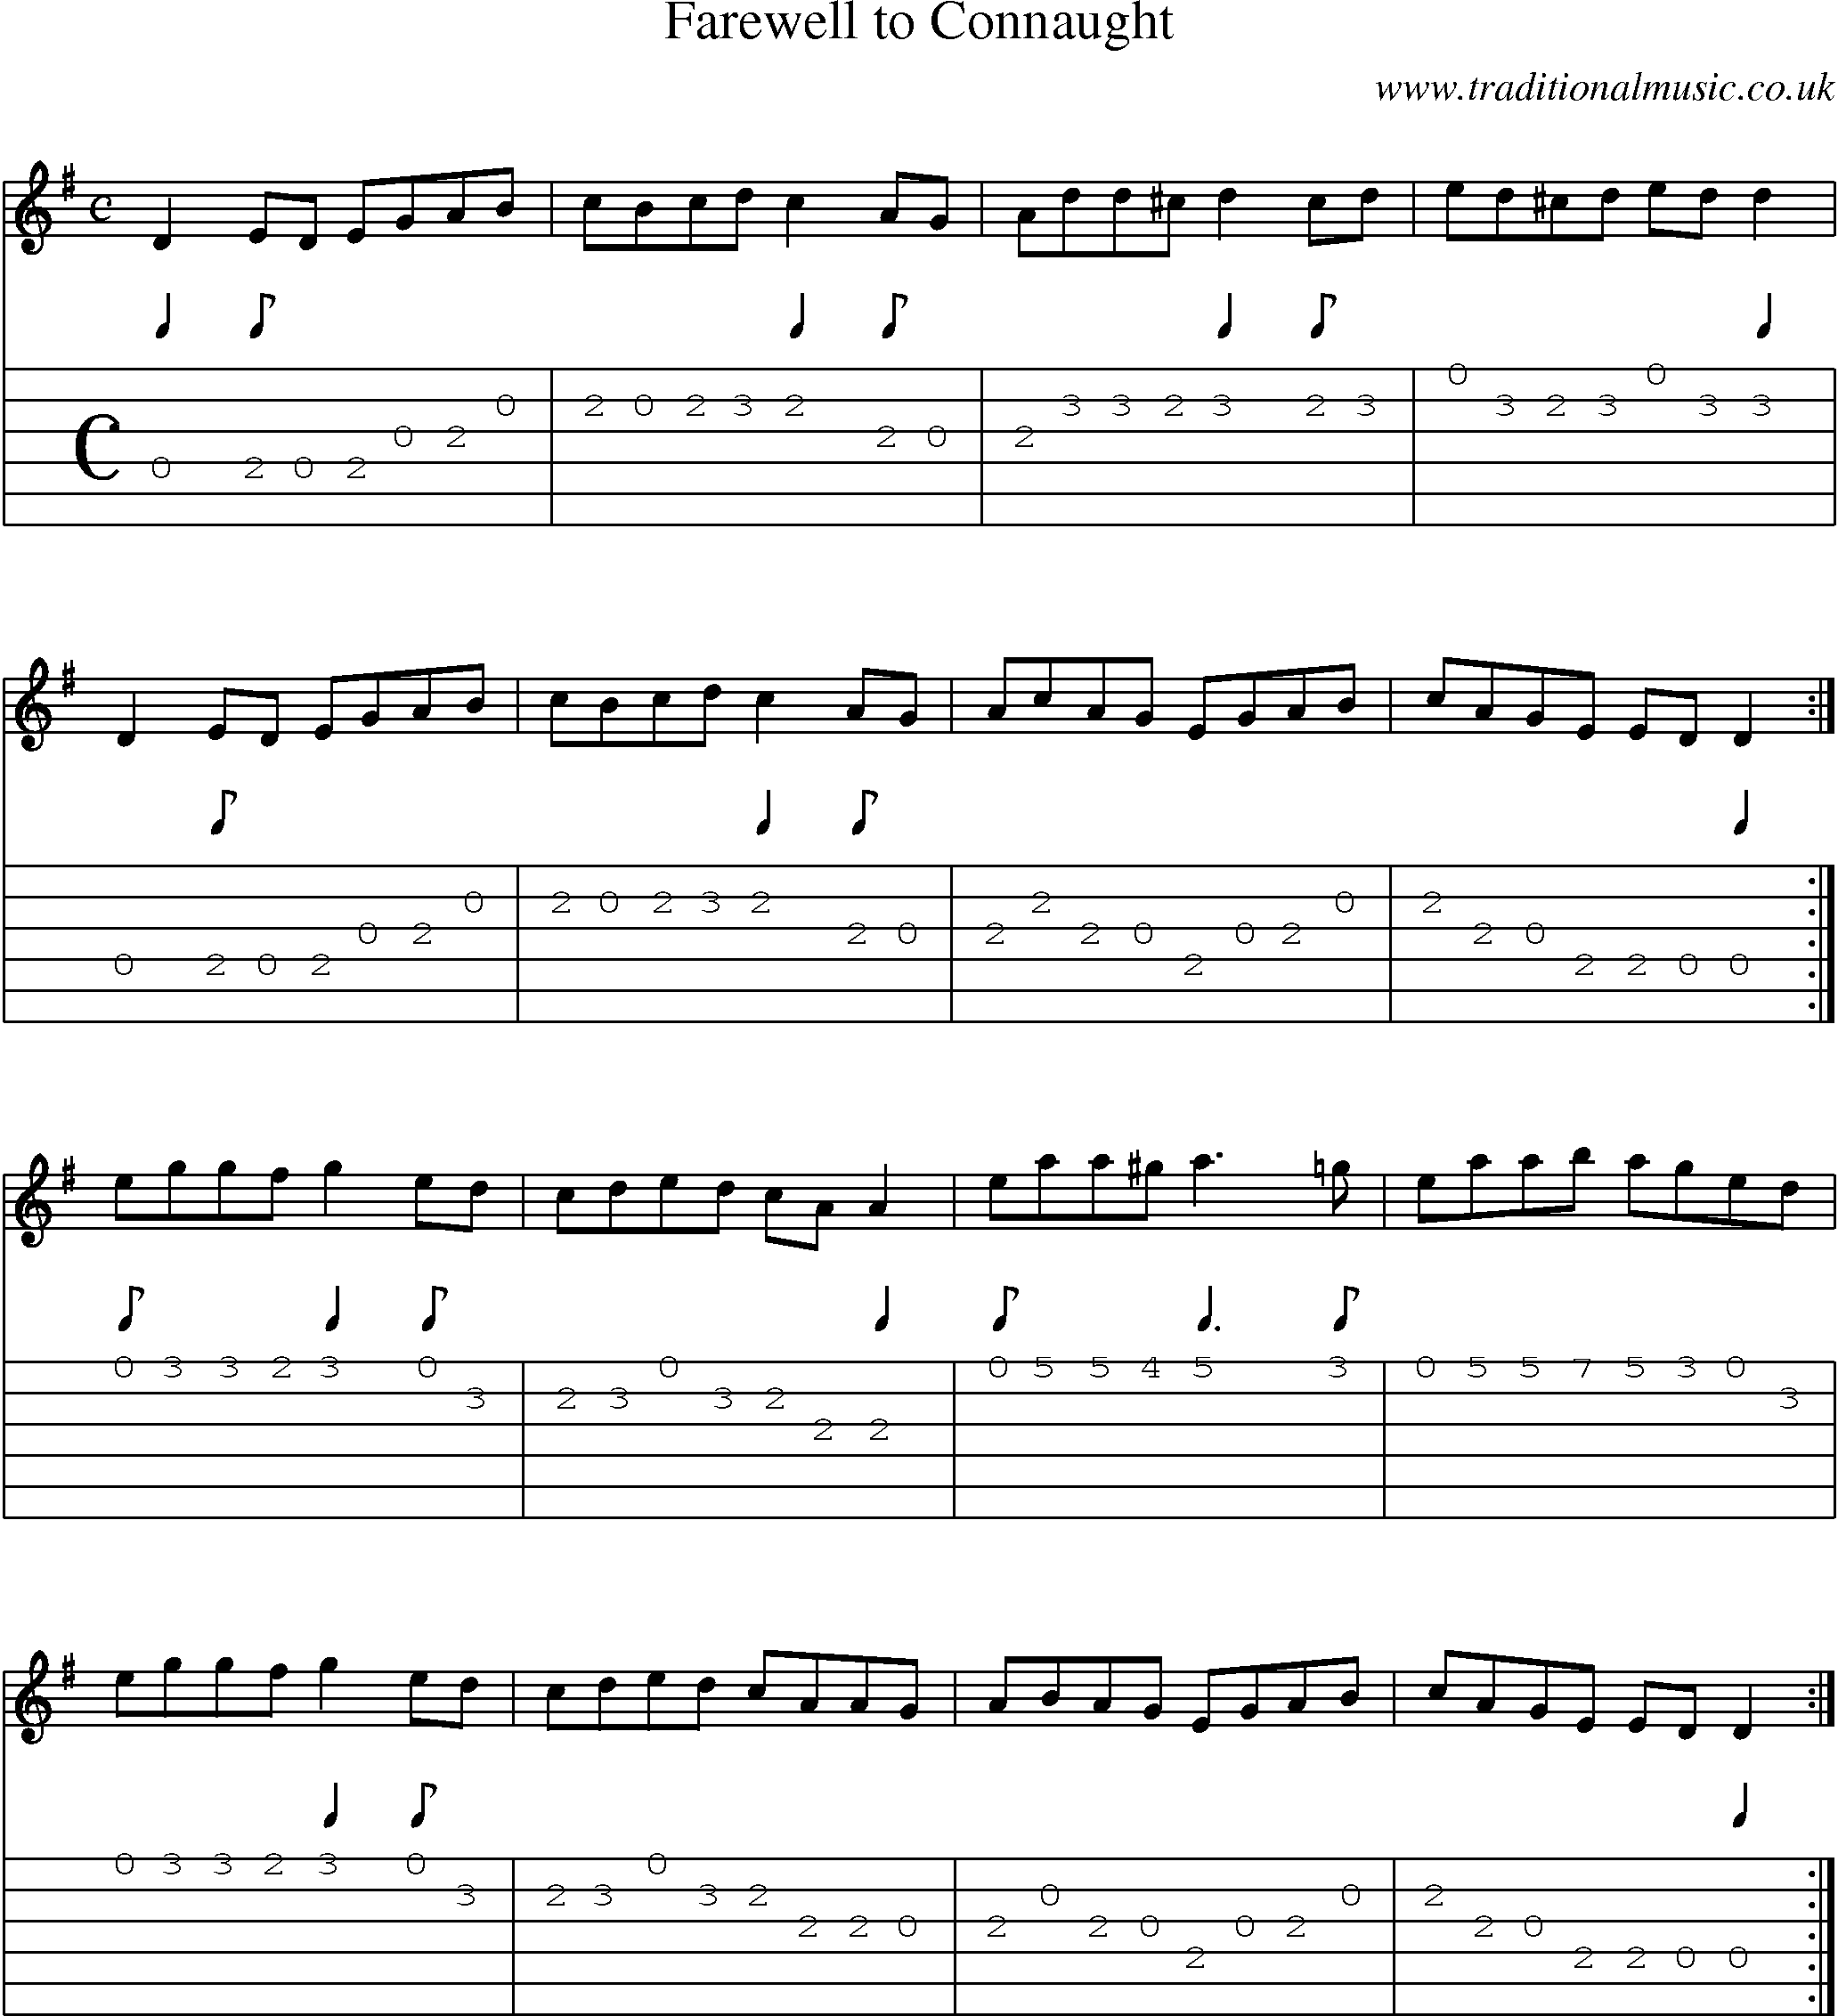 Music Score and Guitar Tabs for Farewell To Connaught